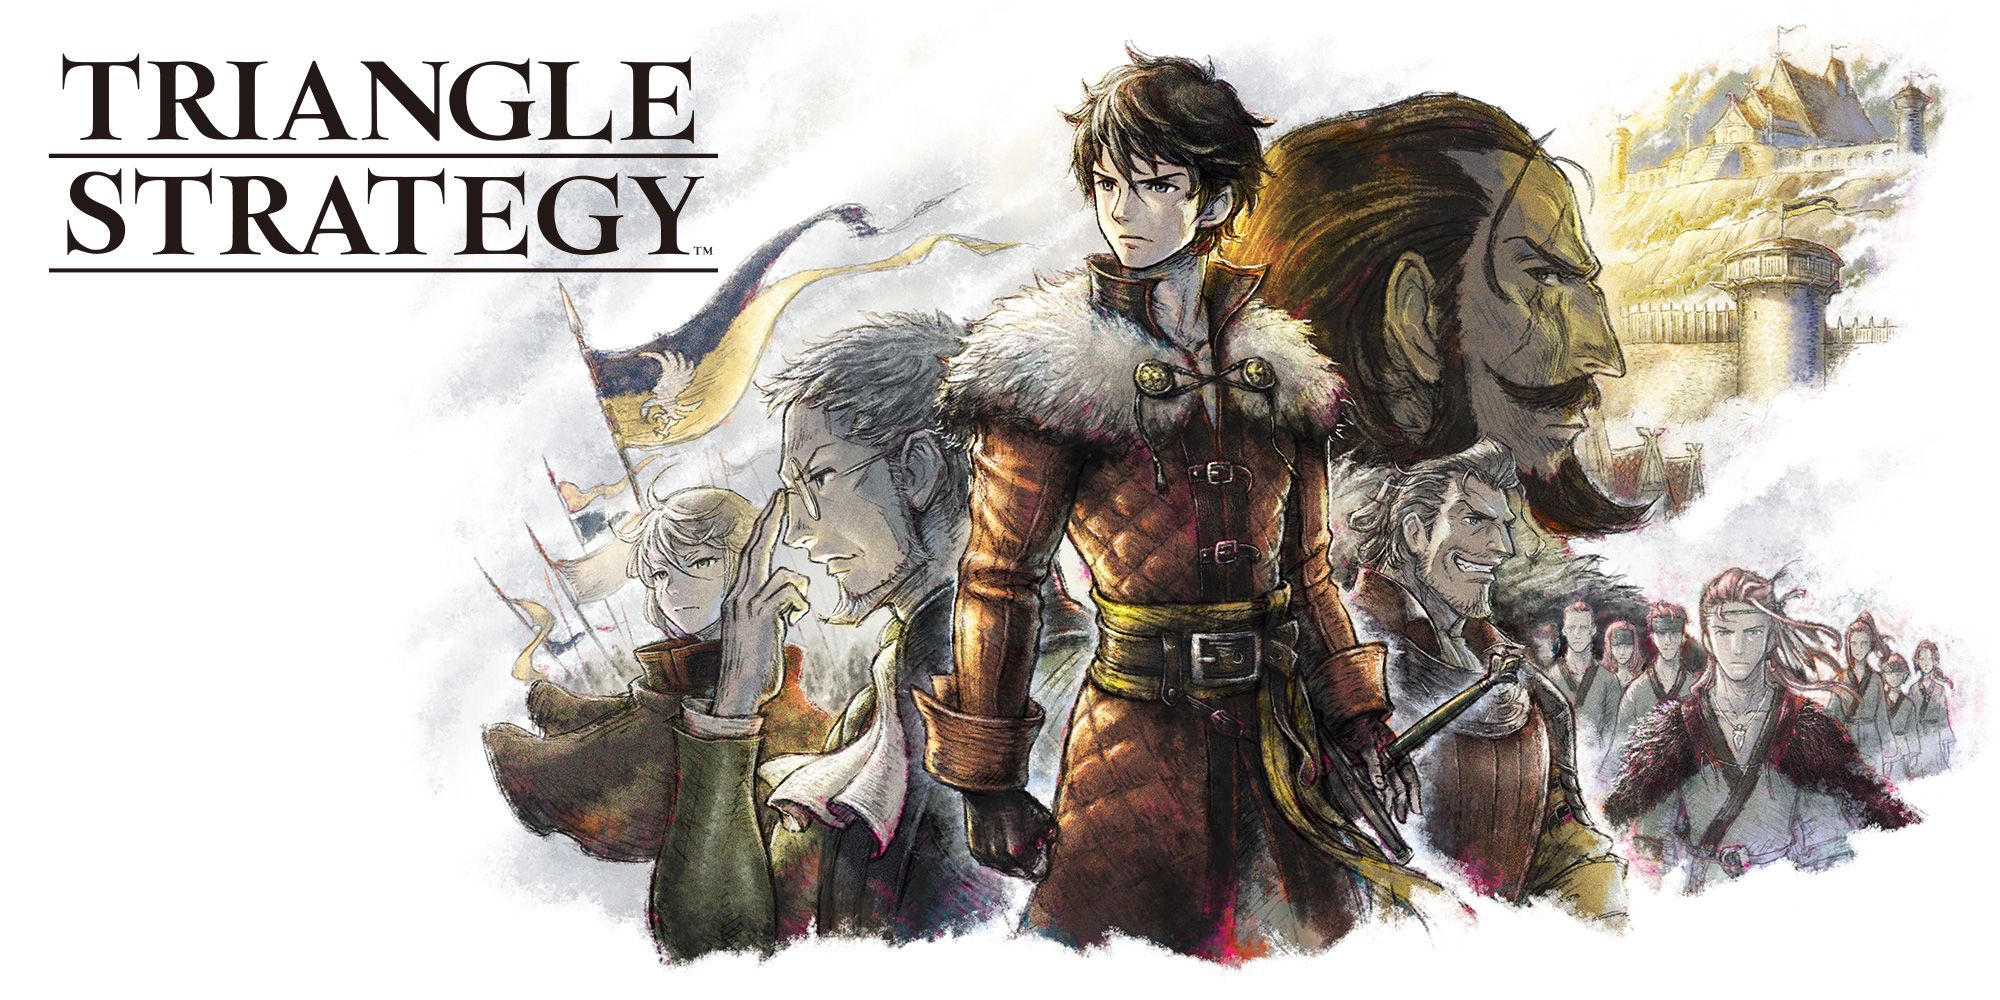 Official artwork of Triangle Strategy, featuring many of the games main characters.